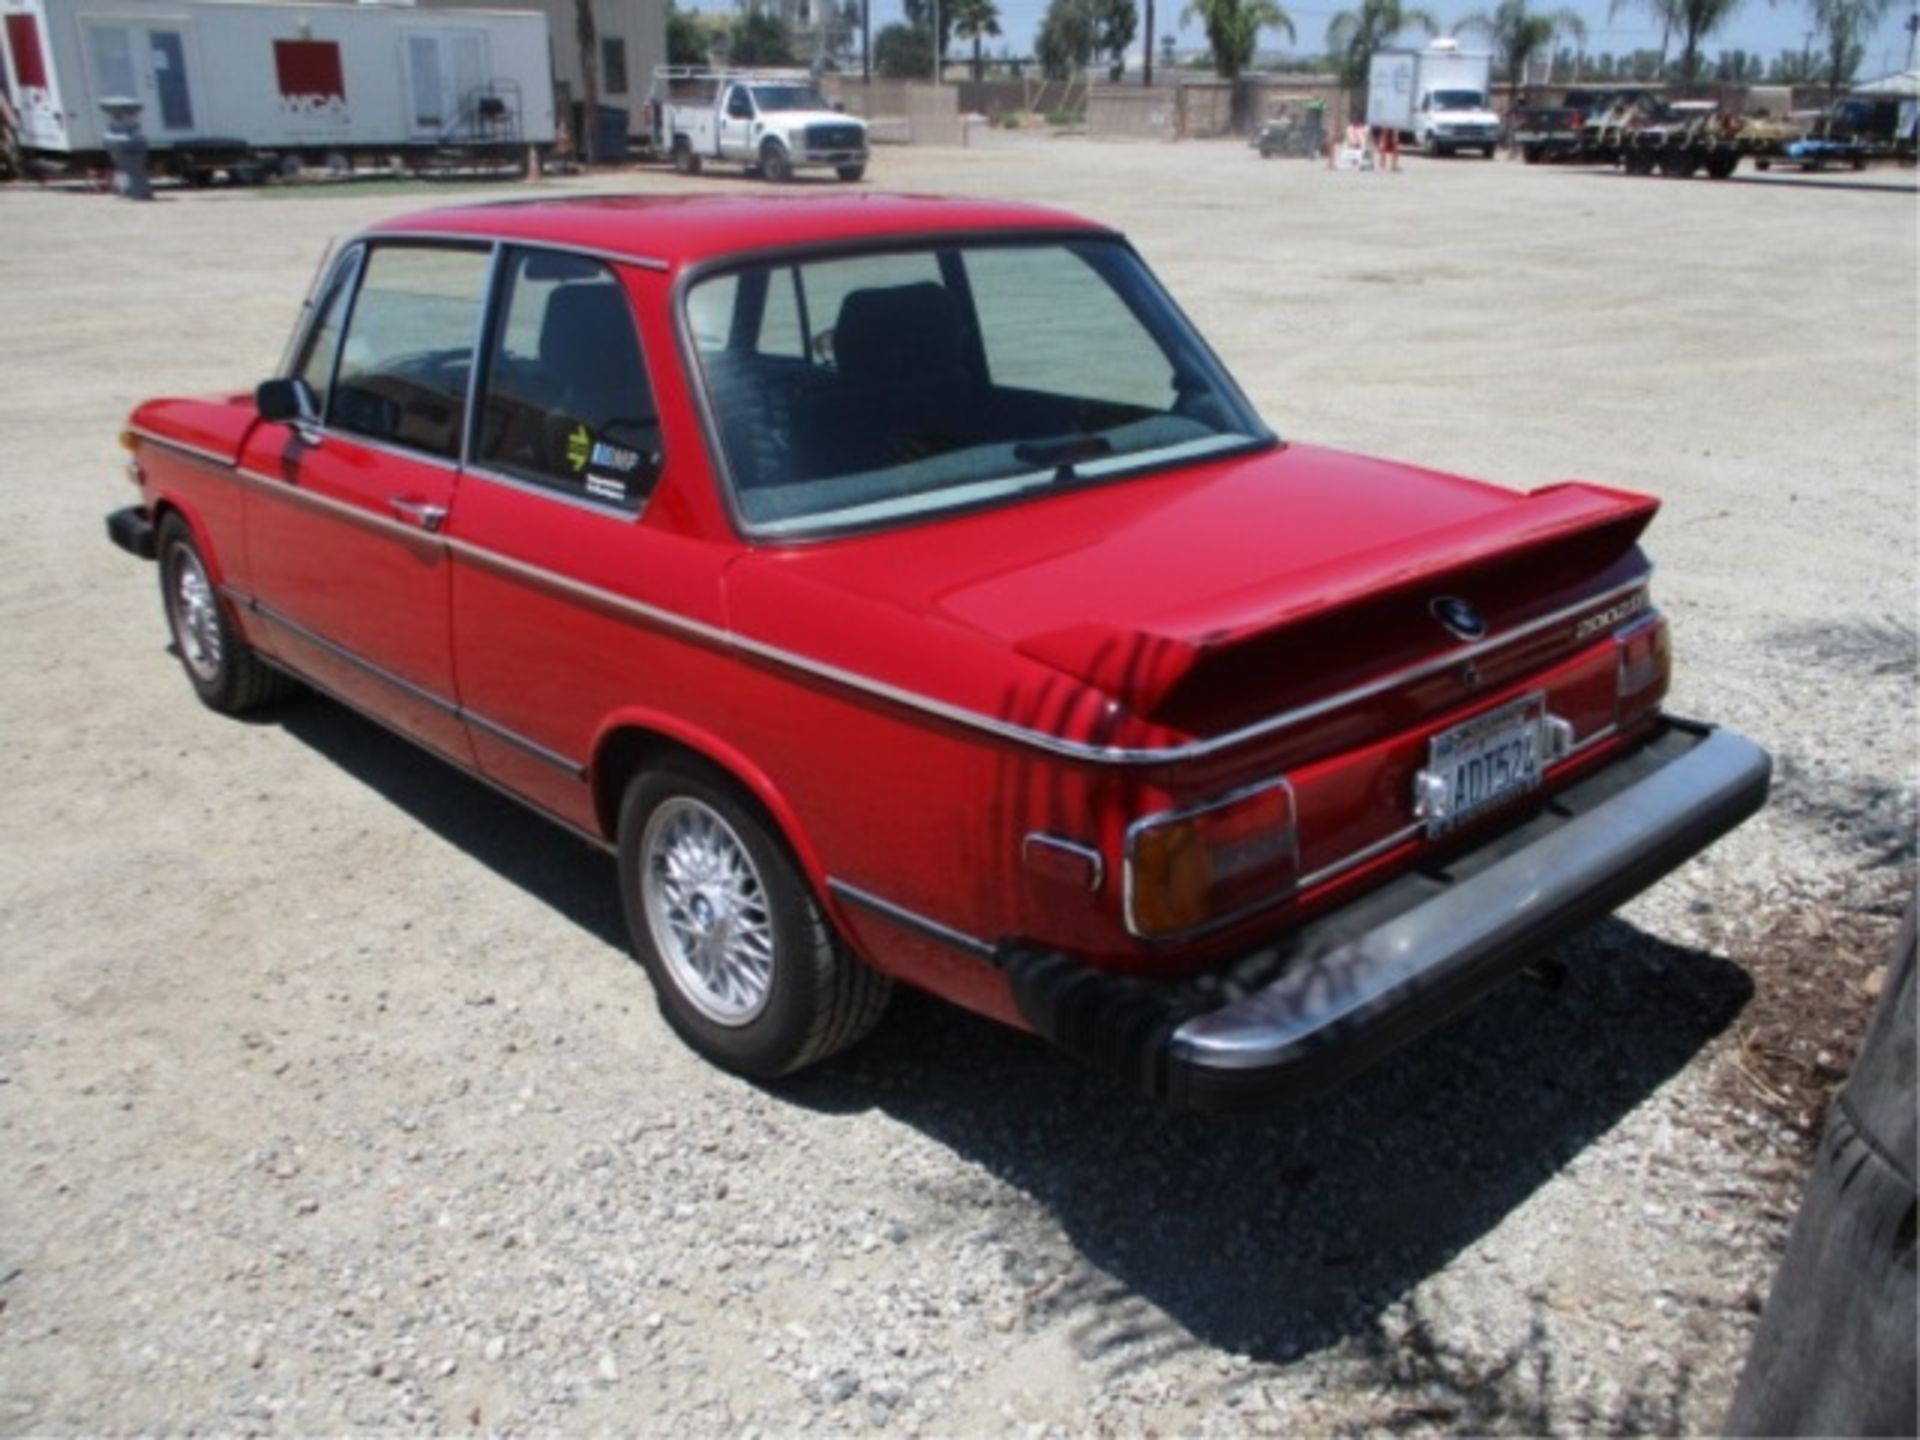 1972 BMW 2002ti Coupe, M10 4-Cyl Gas, 4-Speed Manual, S/N: 2761619, Mile/Hours - 49518 - Image 20 of 79